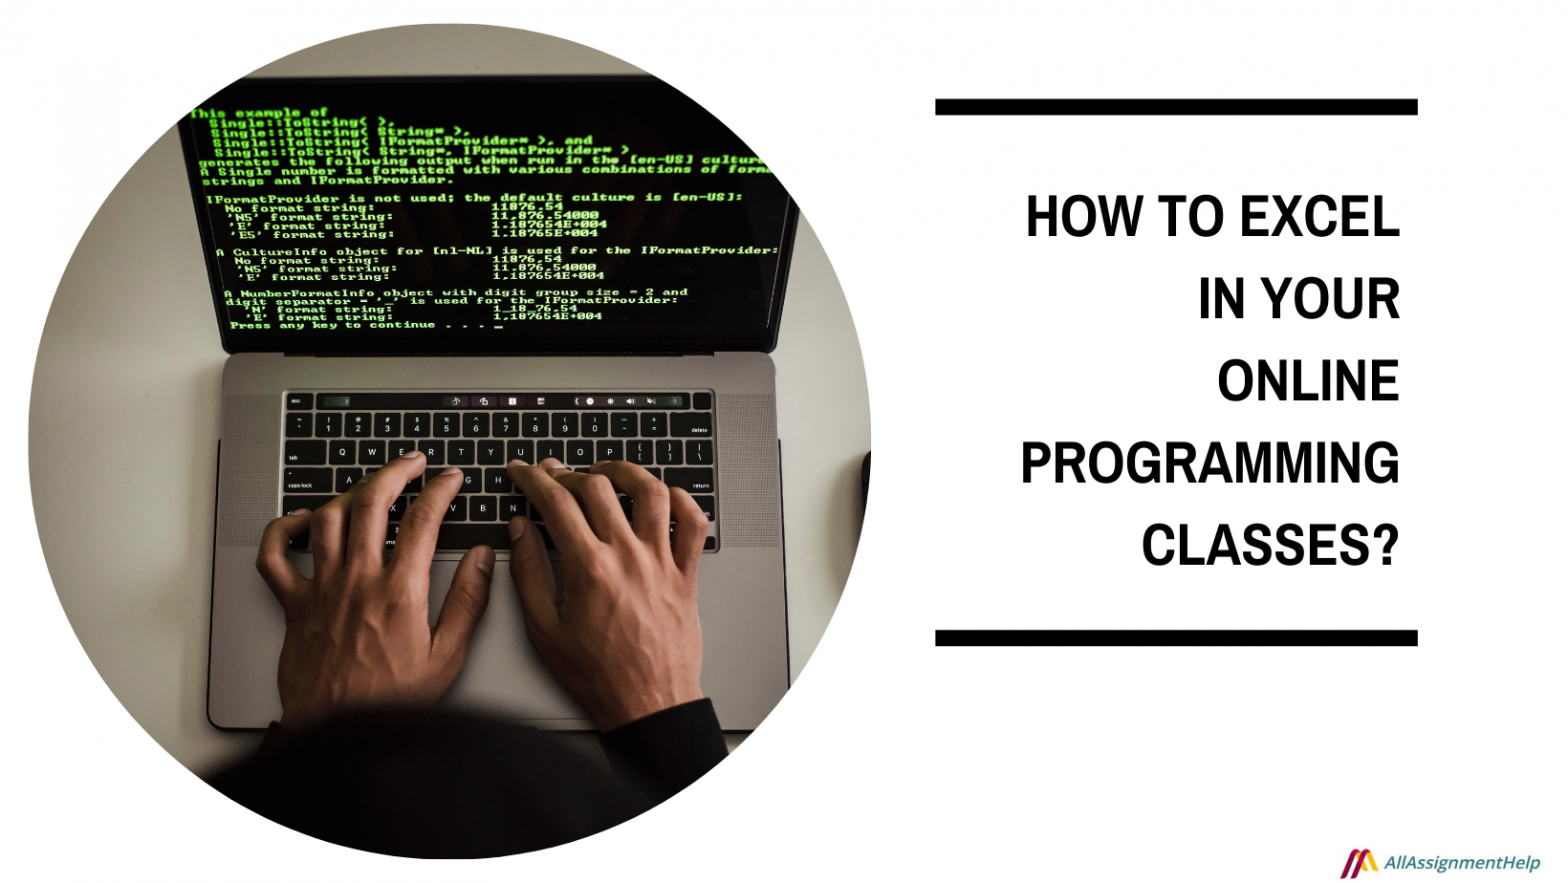 How To Excel In Your Online Programming Classes?